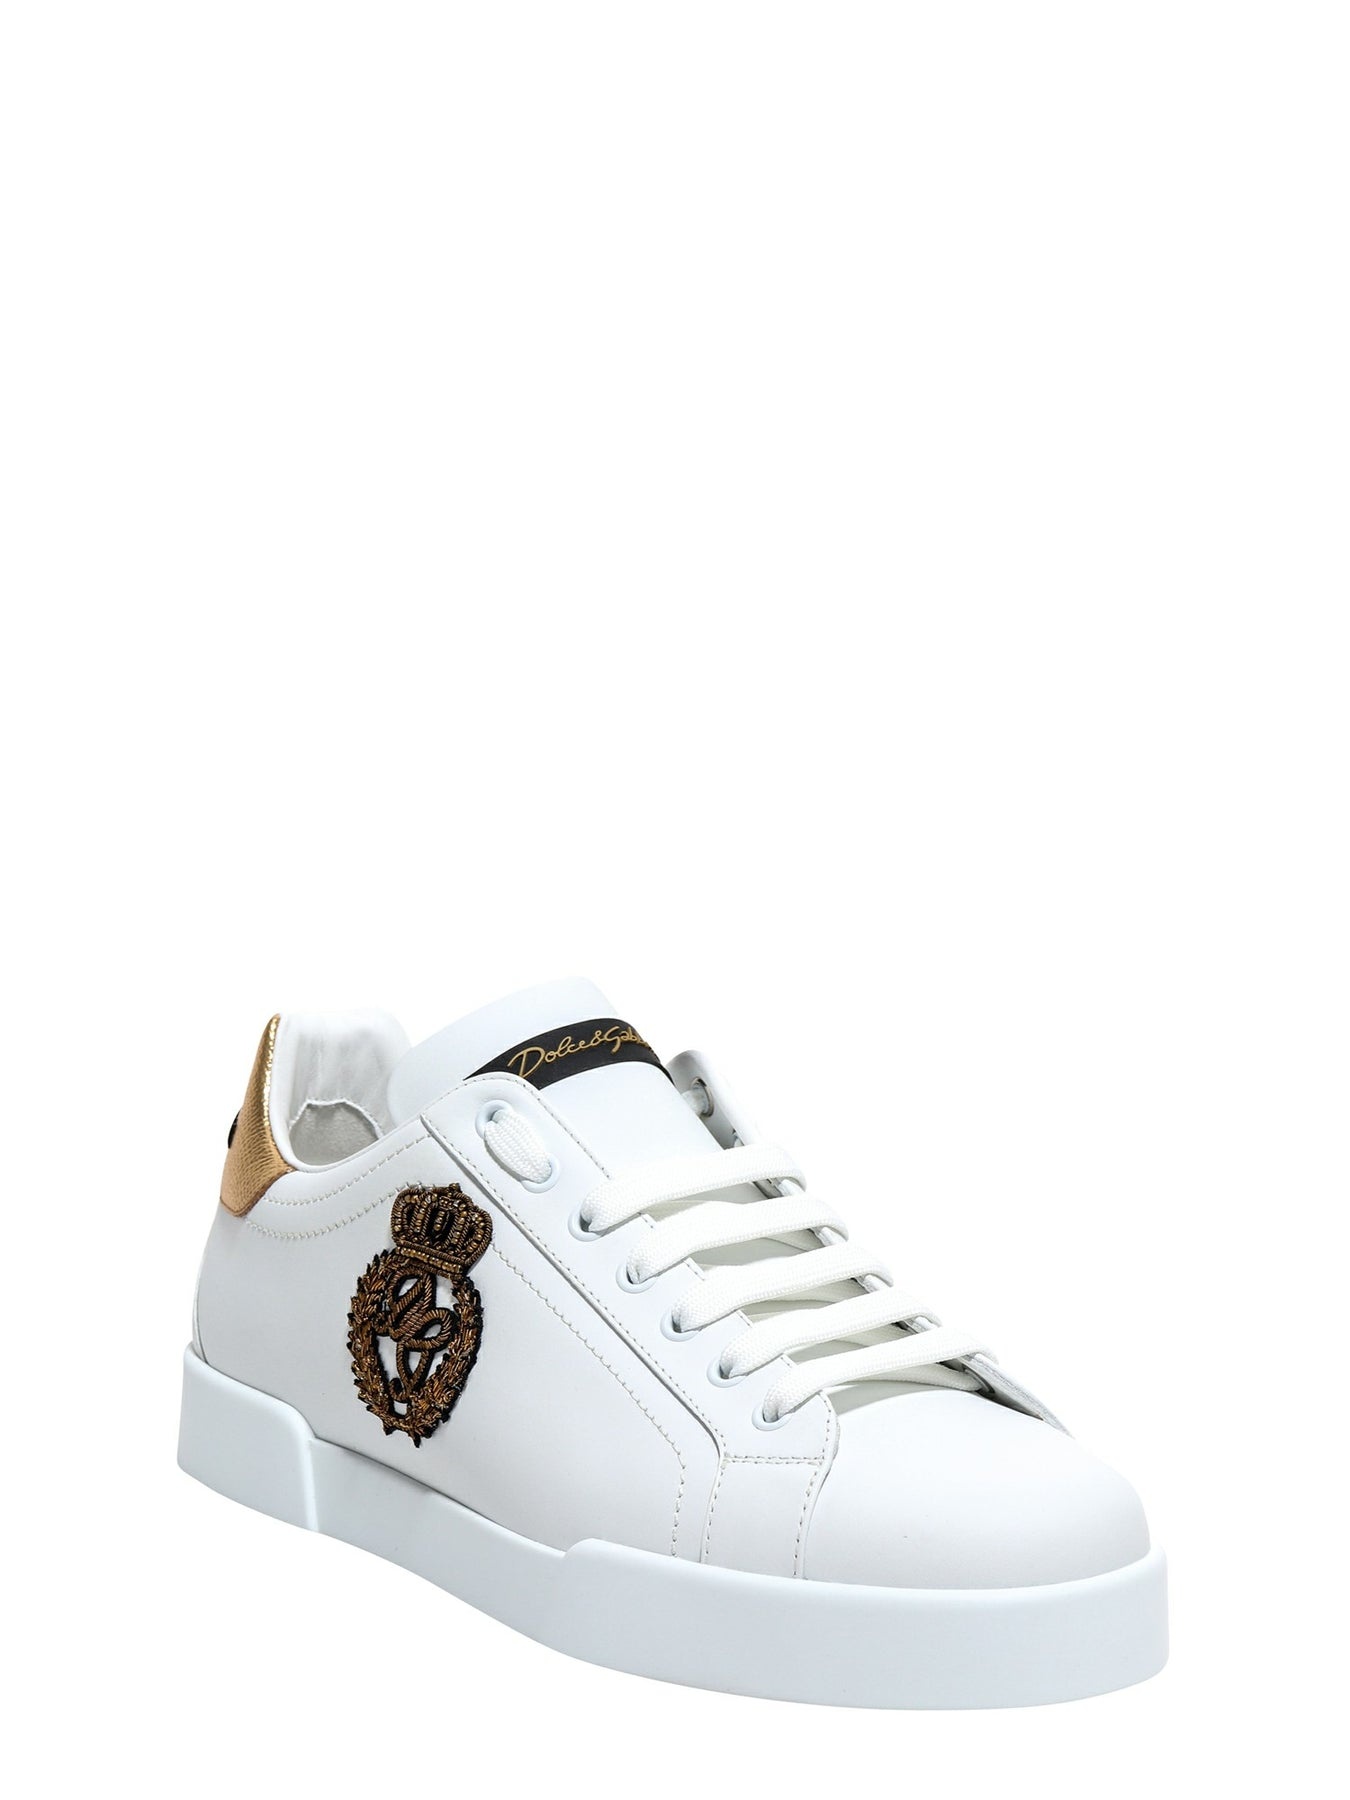 Portofino leather sneakers with logoed crown patch - 2